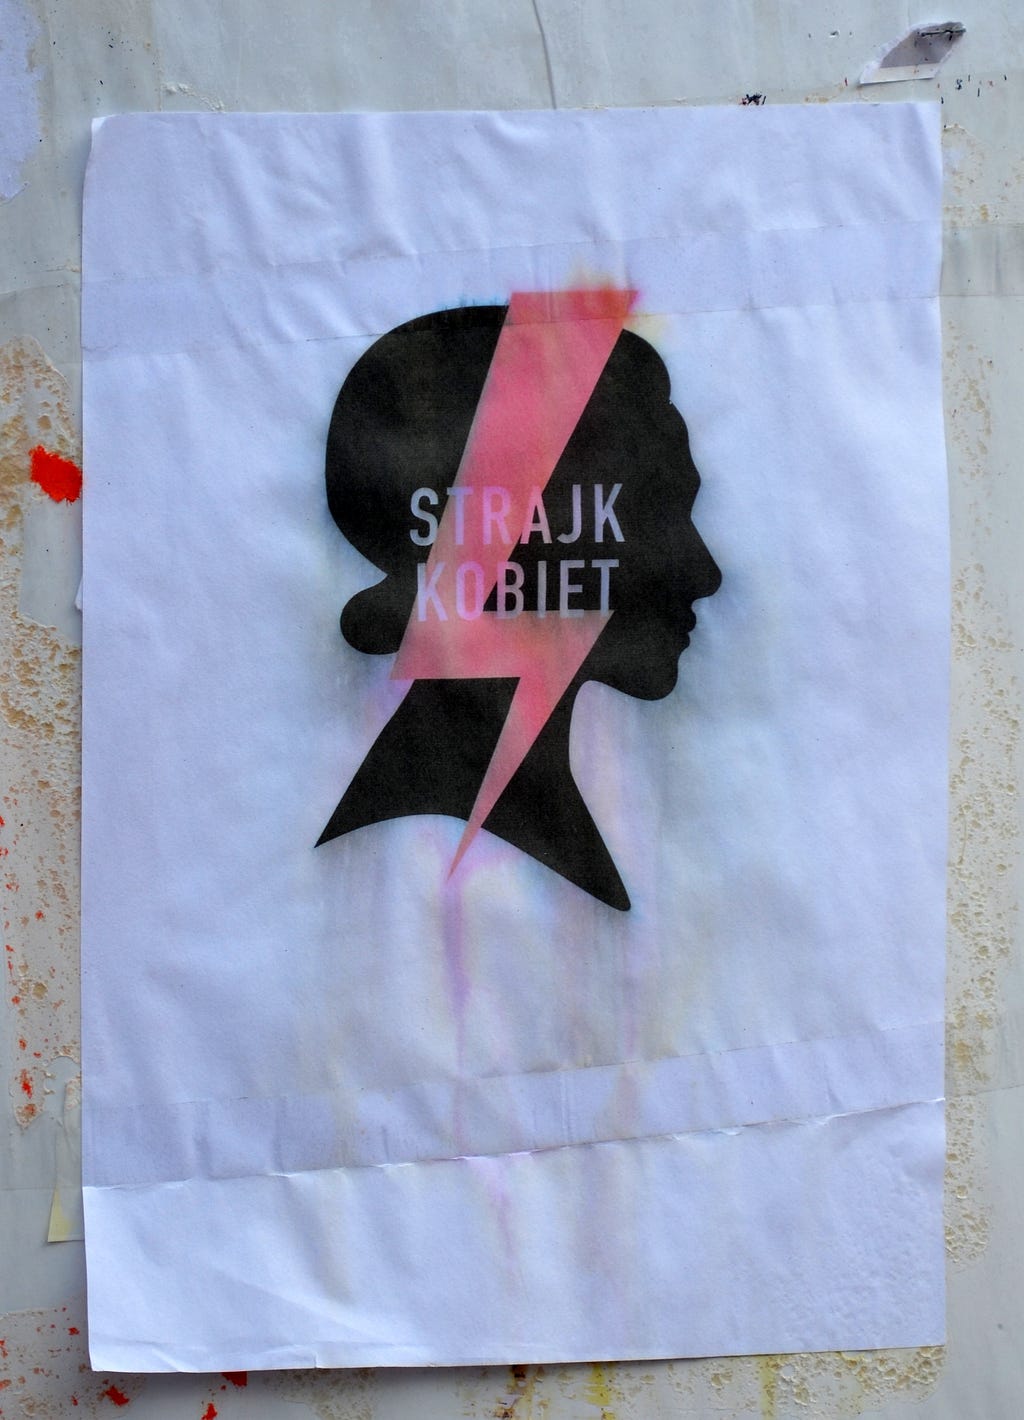 A flyer hangs on a wall in Sanok, Poland, October 2020. On a white background, a woman’s silhouette with a bright lightning bolt and the words, STRAJK KOBIET / WOMEN’S STRIKE